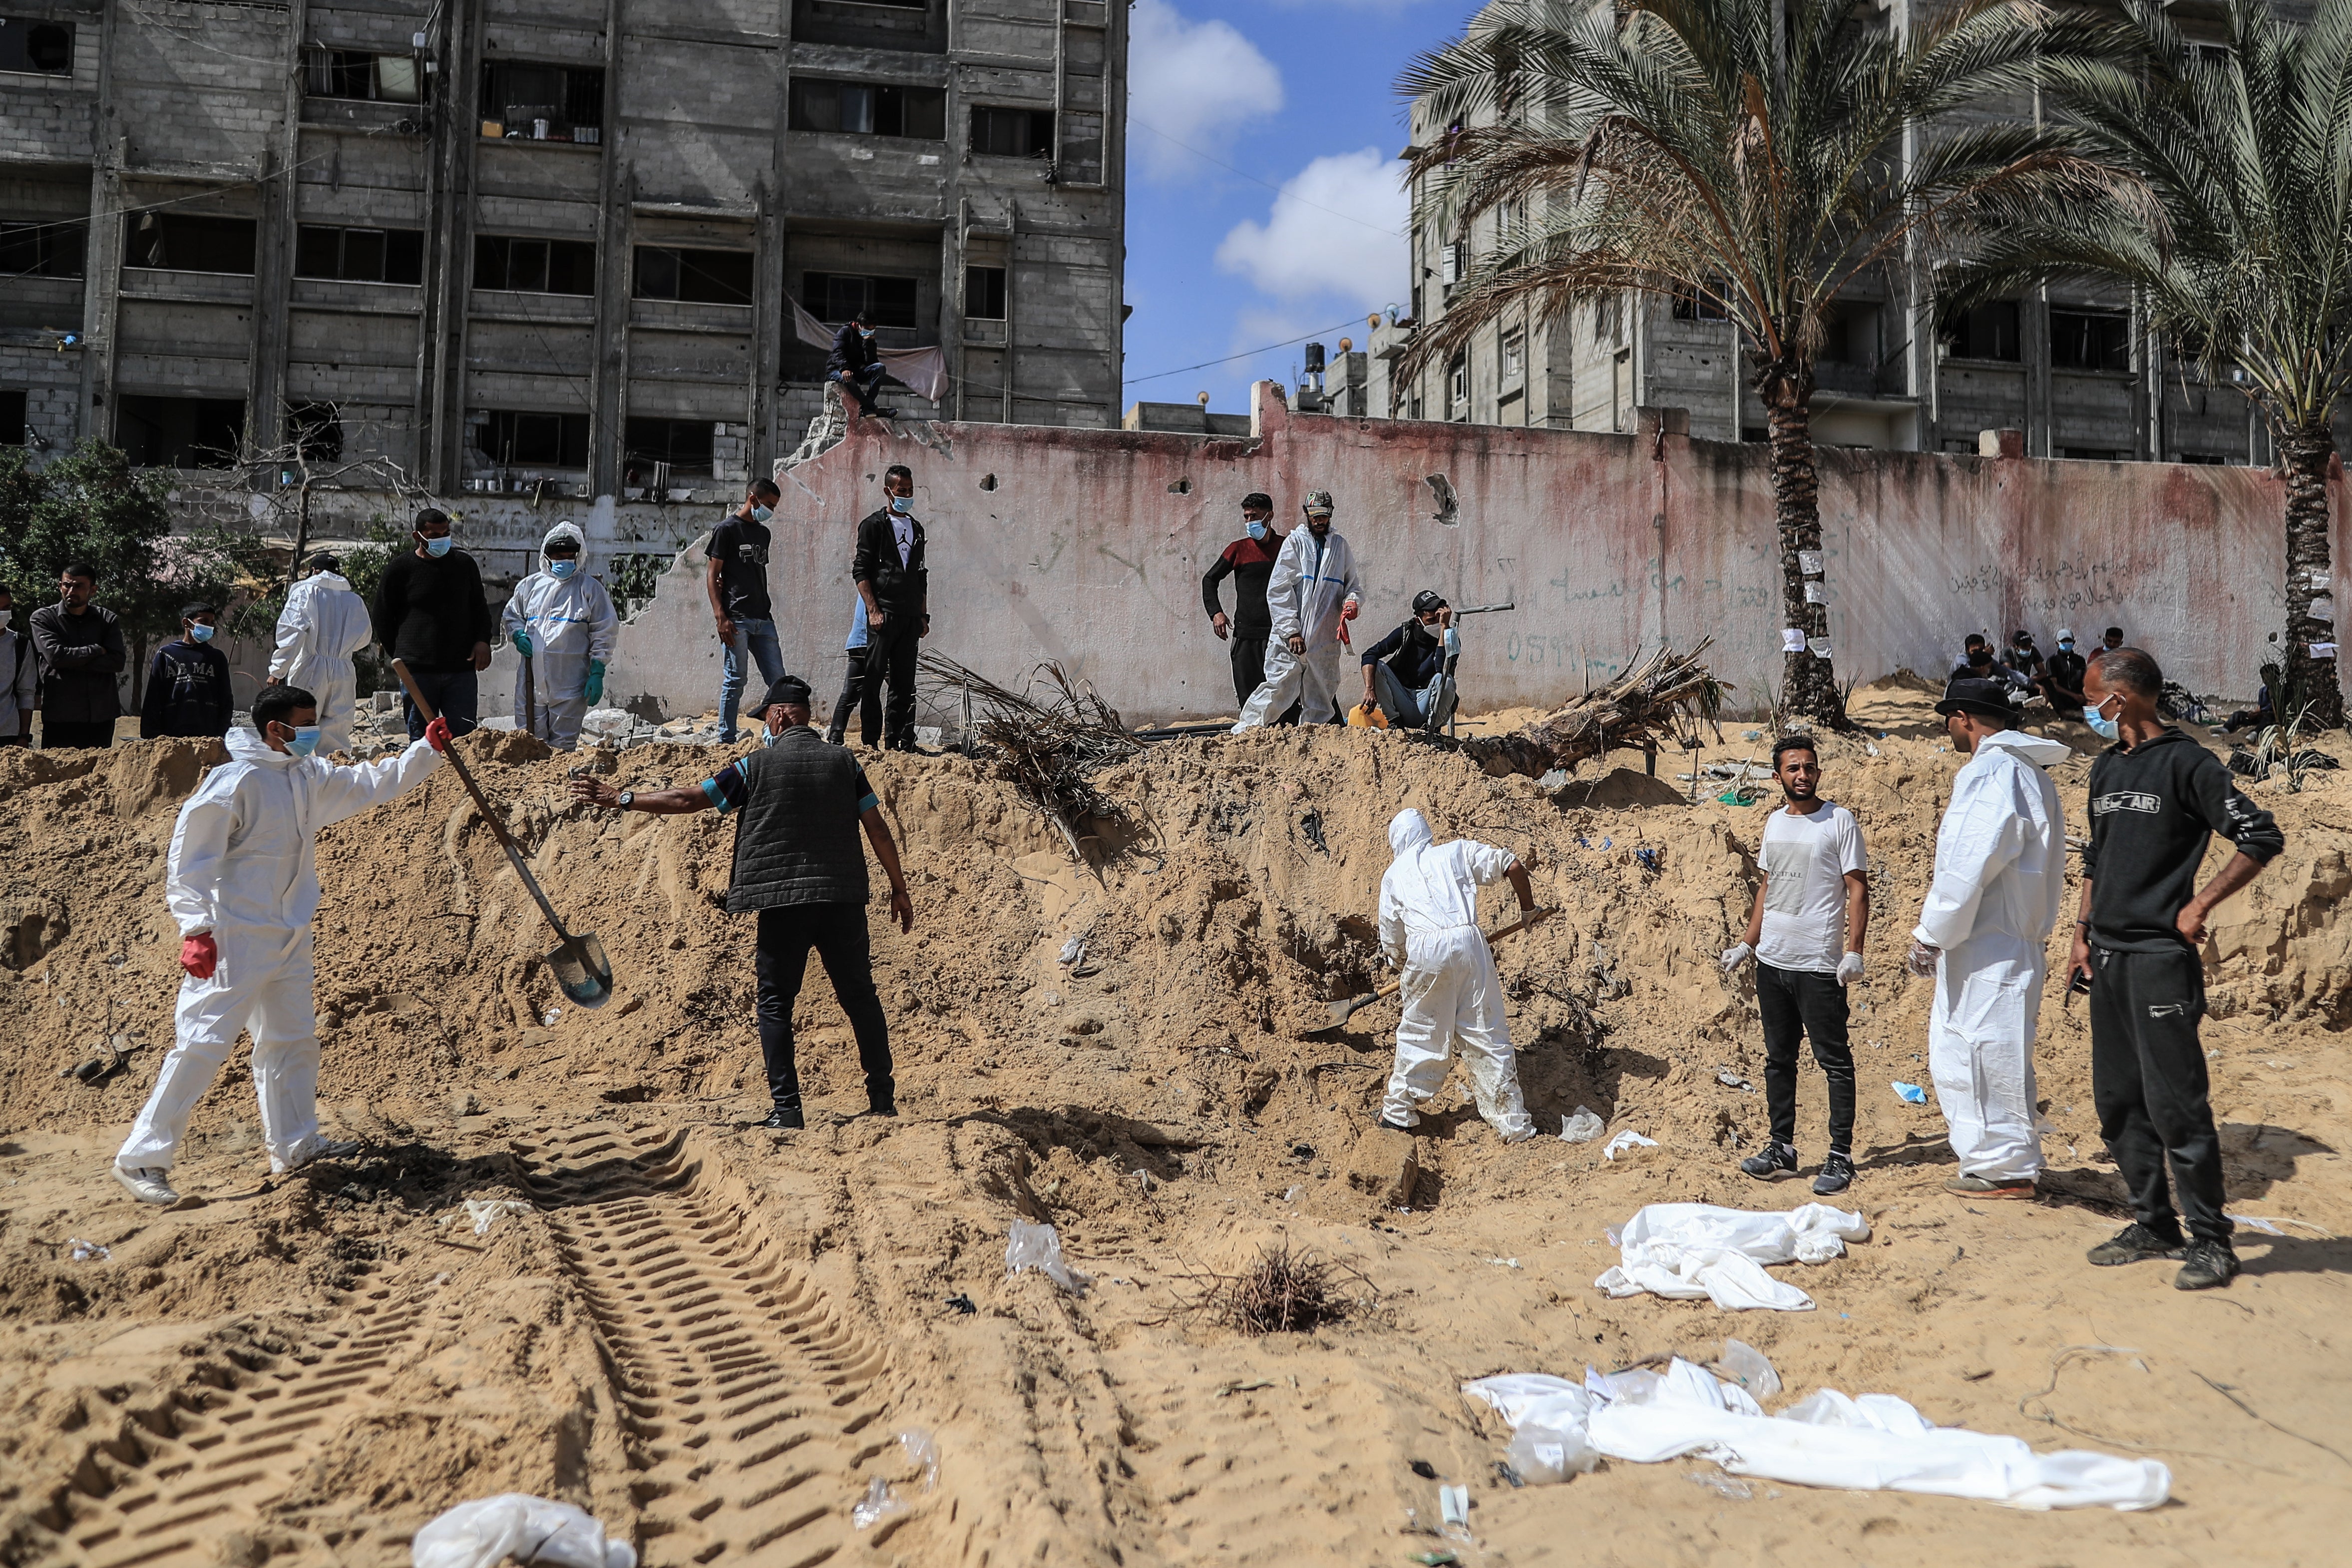 Gazan authorities remove the remains of Palestinians from a mass grave